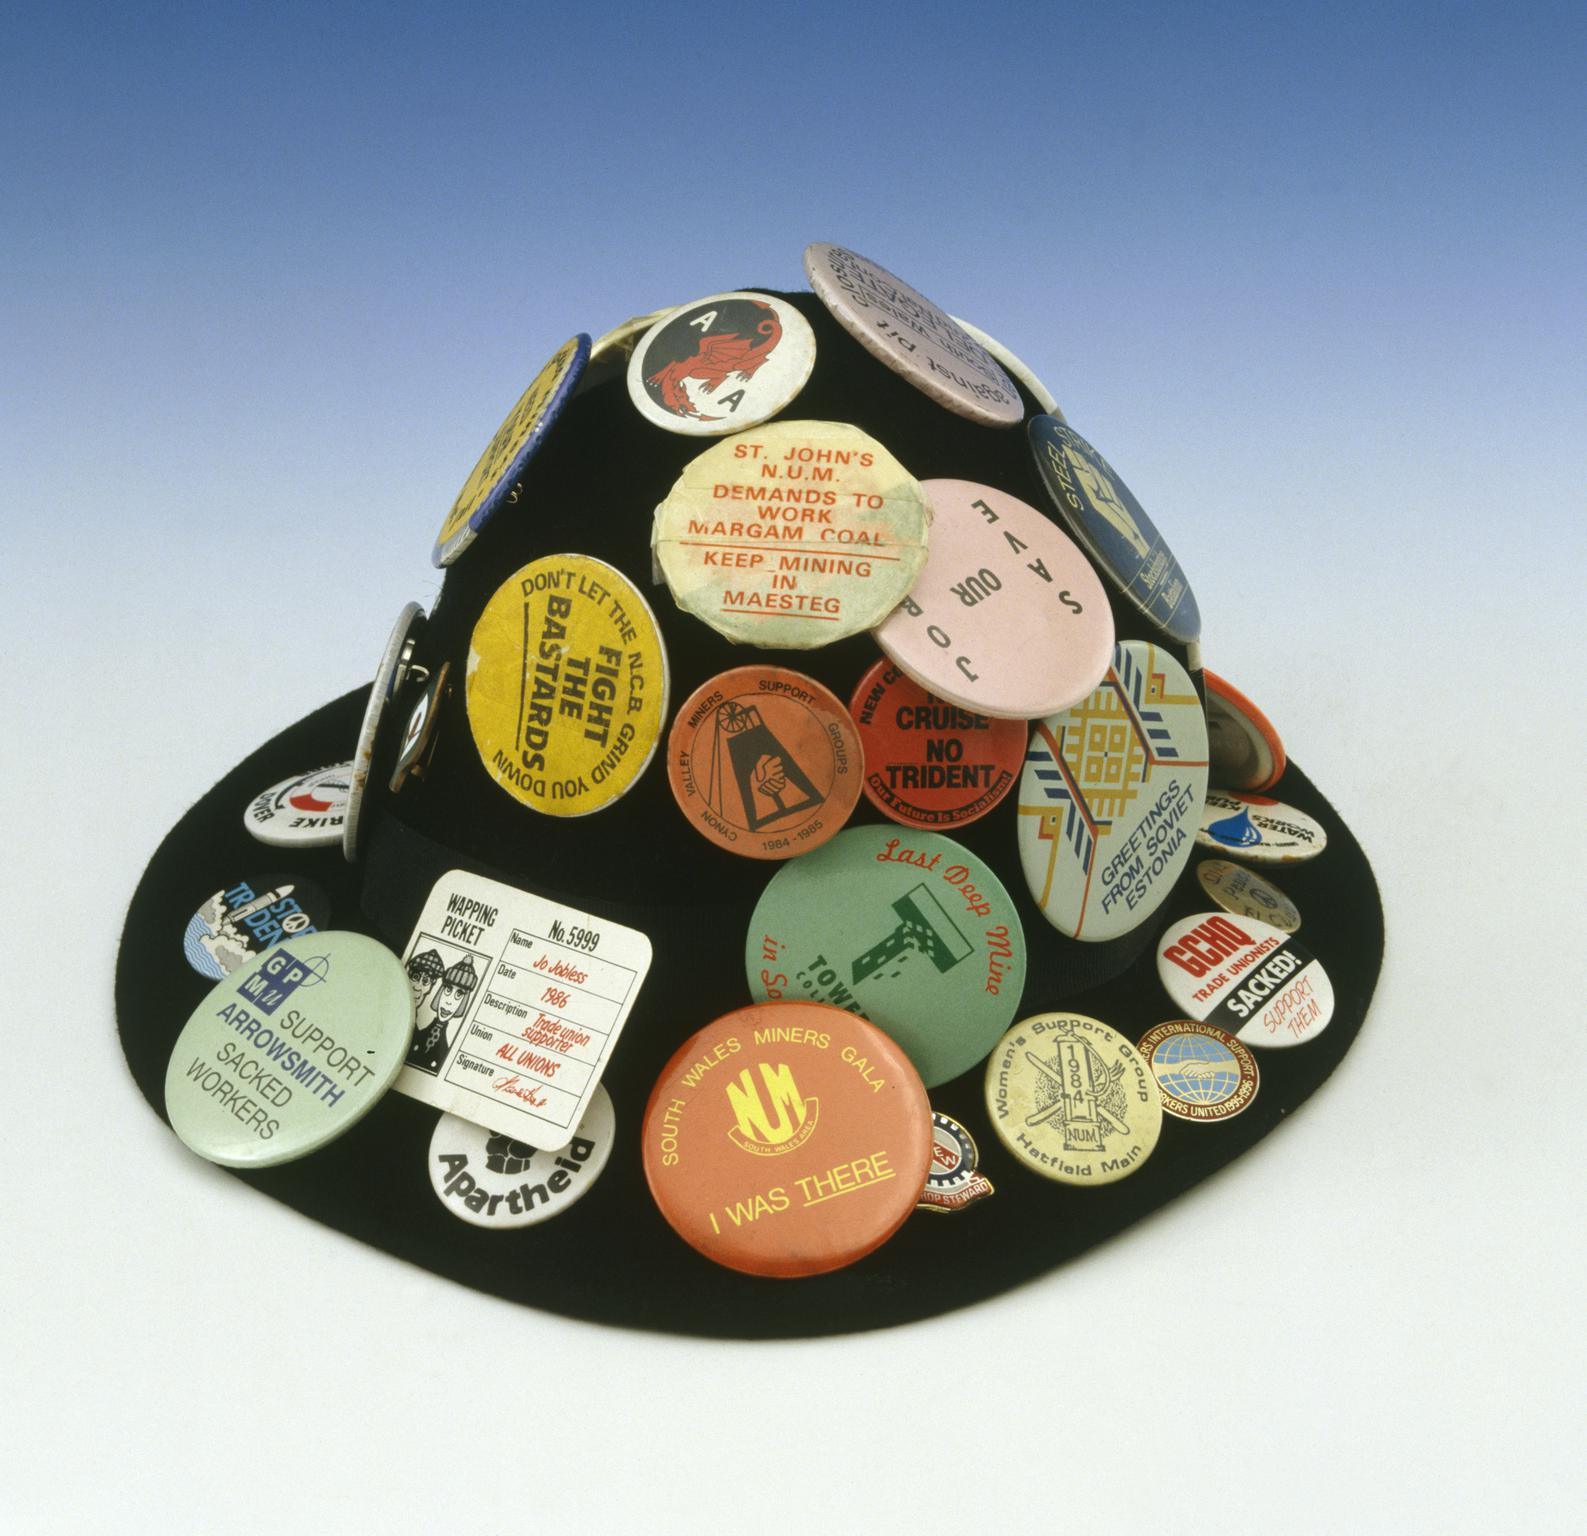 Felt hat with badges attached